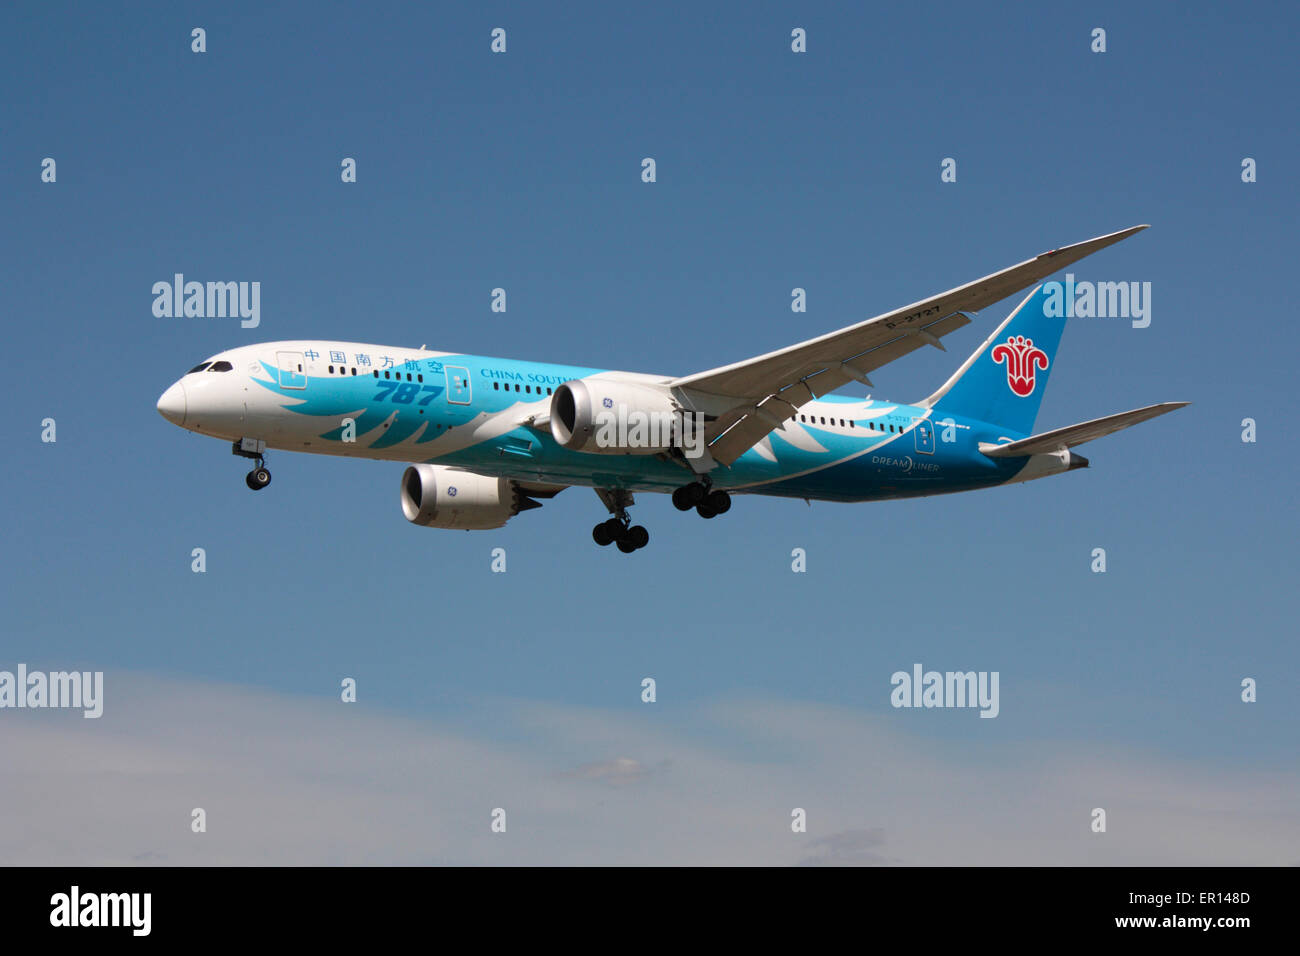 China Southern Airlines Boeing 787-8 Dreamliner commercial passenger jet plane on approach Stock Photo